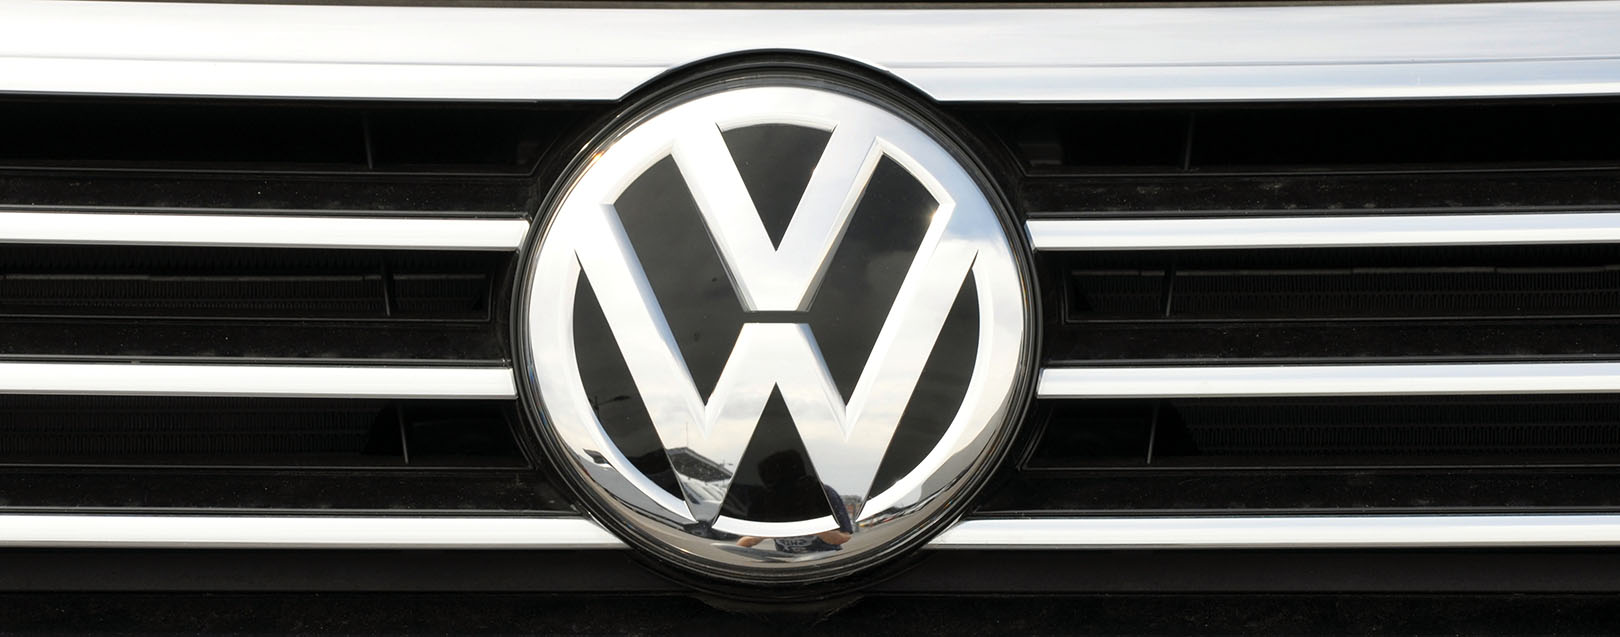 Volkswagen eyes SUV segment in India, to launch Tiguan this year